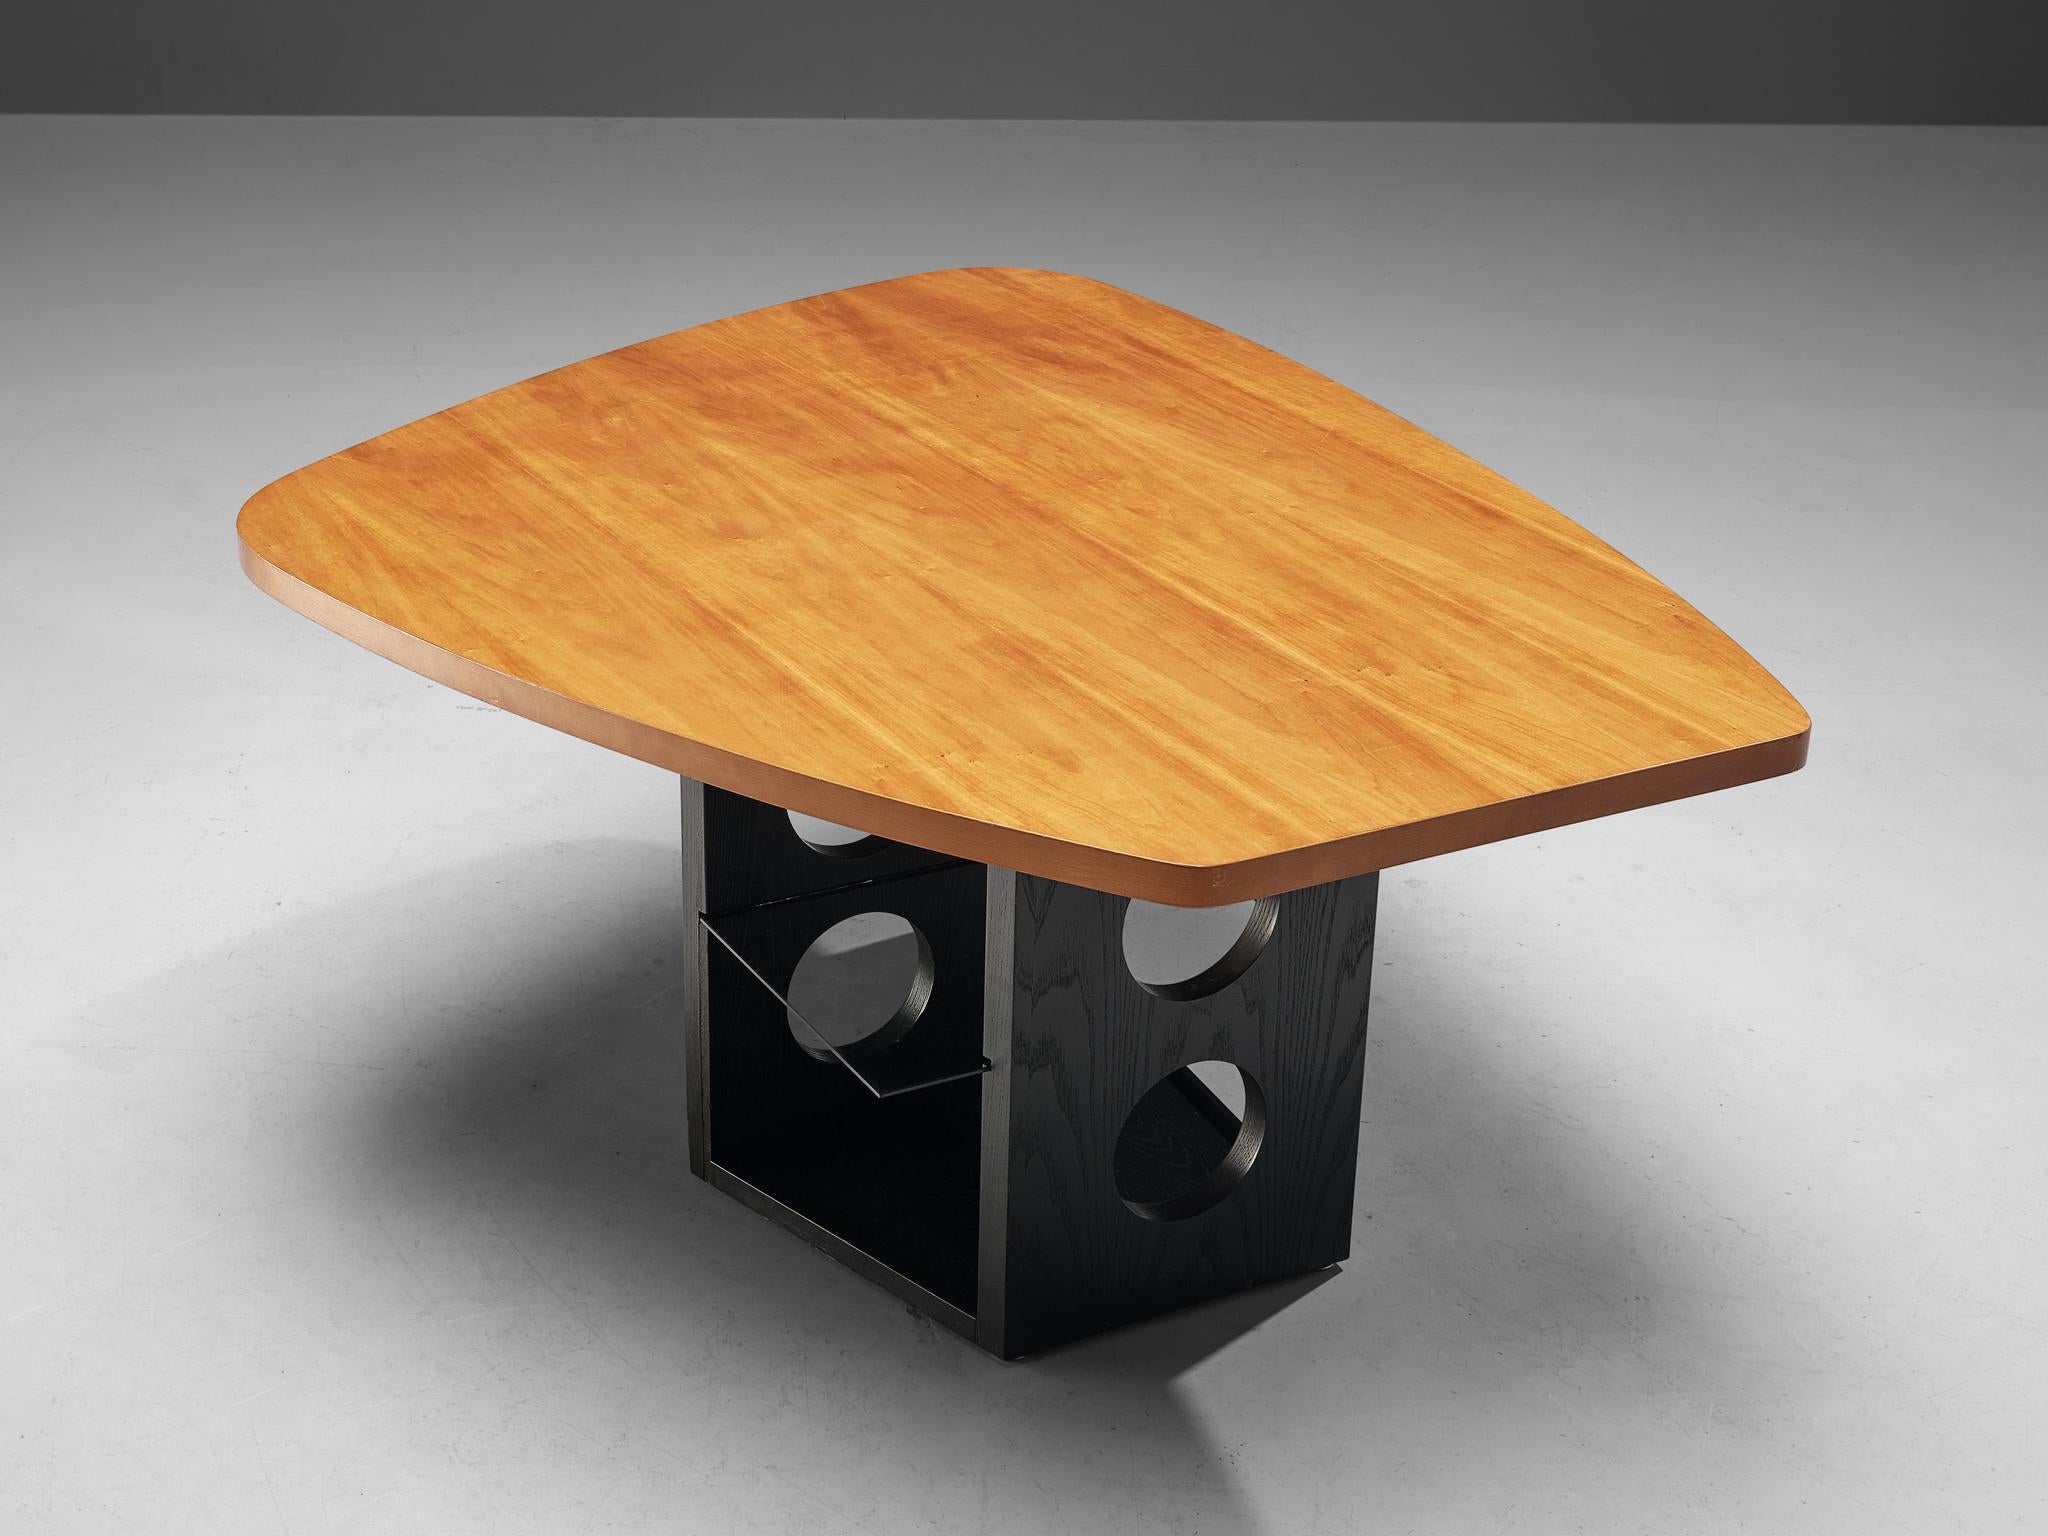 André le Stang, Axel Bruchhäuser and Alison Smithson, Tecta, dining table or center table model 'M21', lacquered ash, cherry, glass, Germany, designed in 1990.

A truly magnificent piece that scores highly on every design aspect: execution, use of